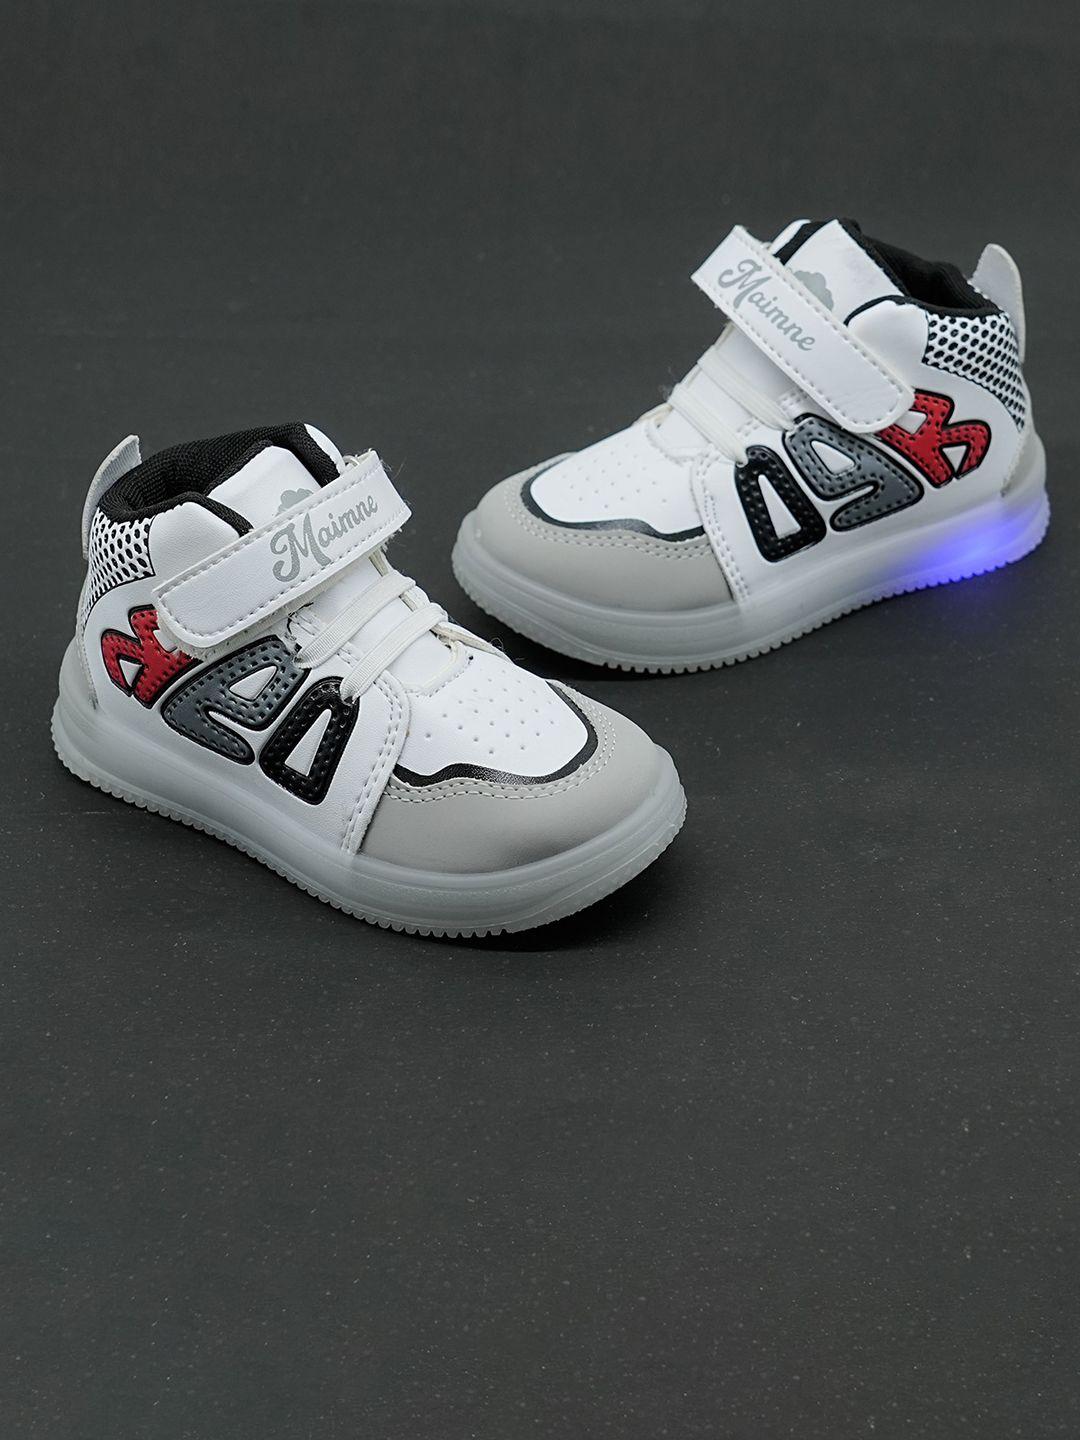 baesd kids mid top printed sneakers with led lights